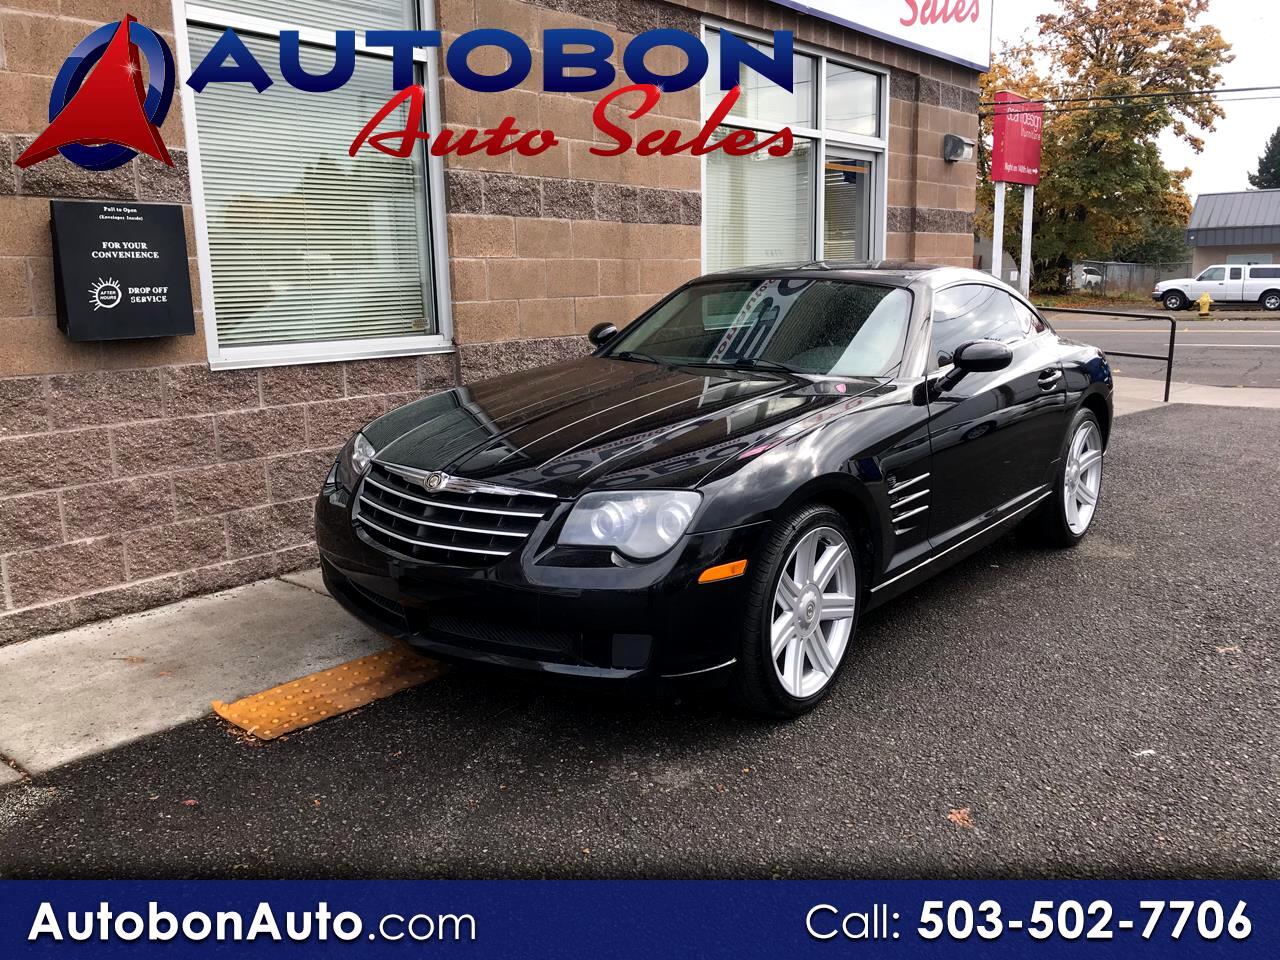 Used 2005 Chrysler Crossfire For Sale In Portland Or 97233